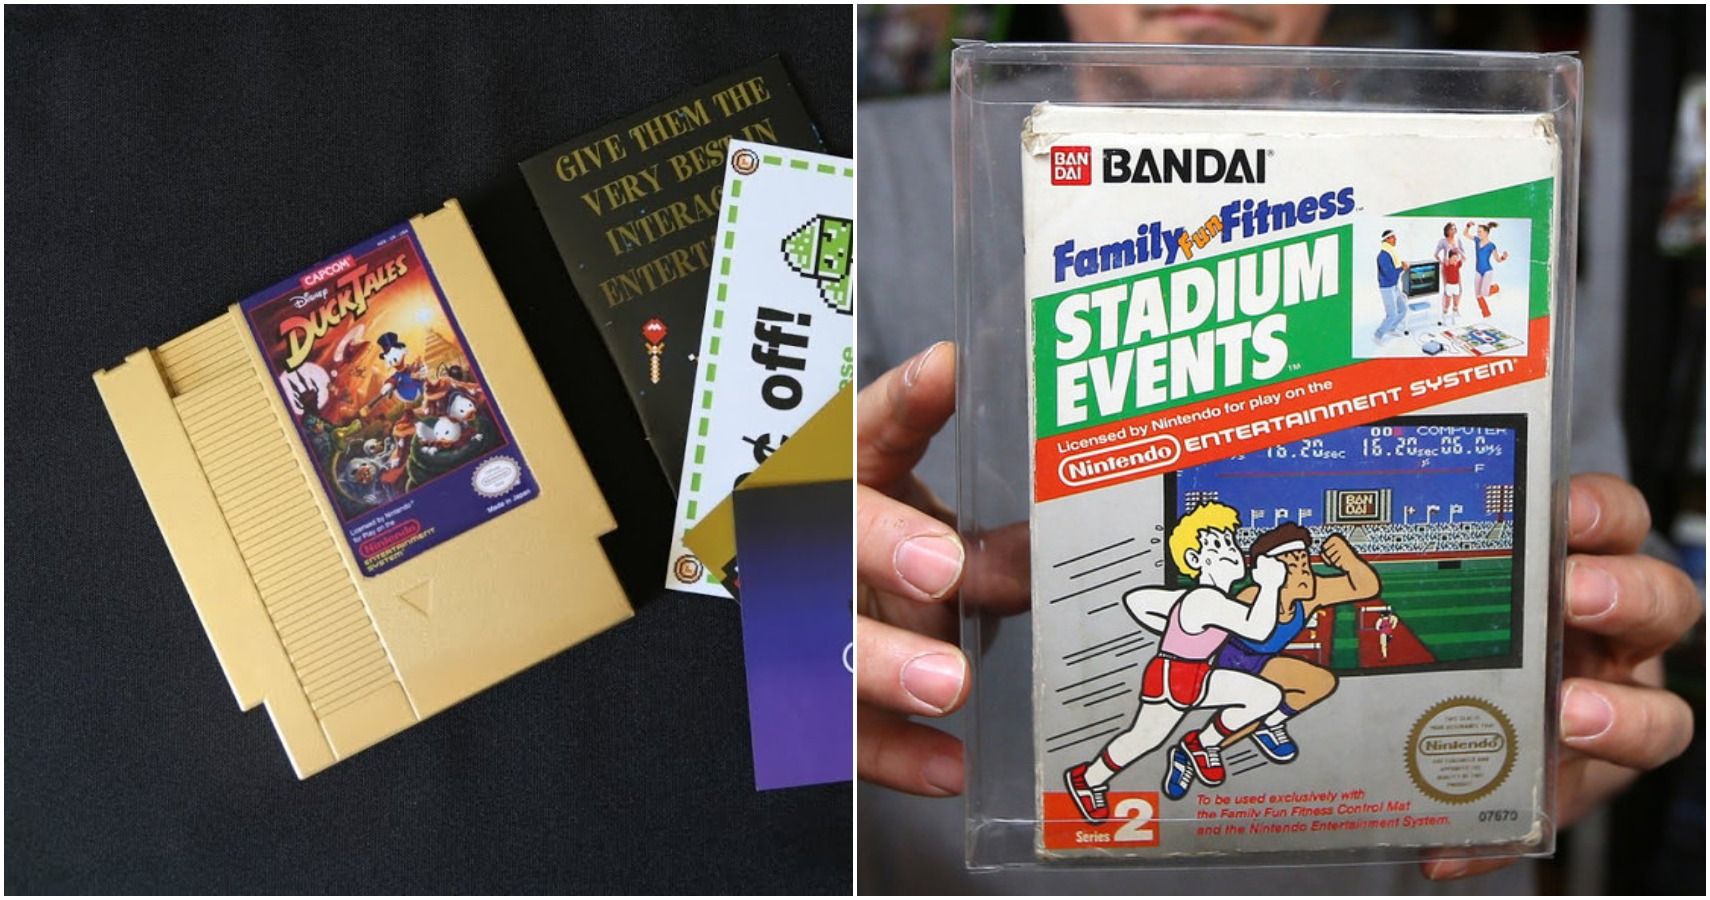 most expensive nes game